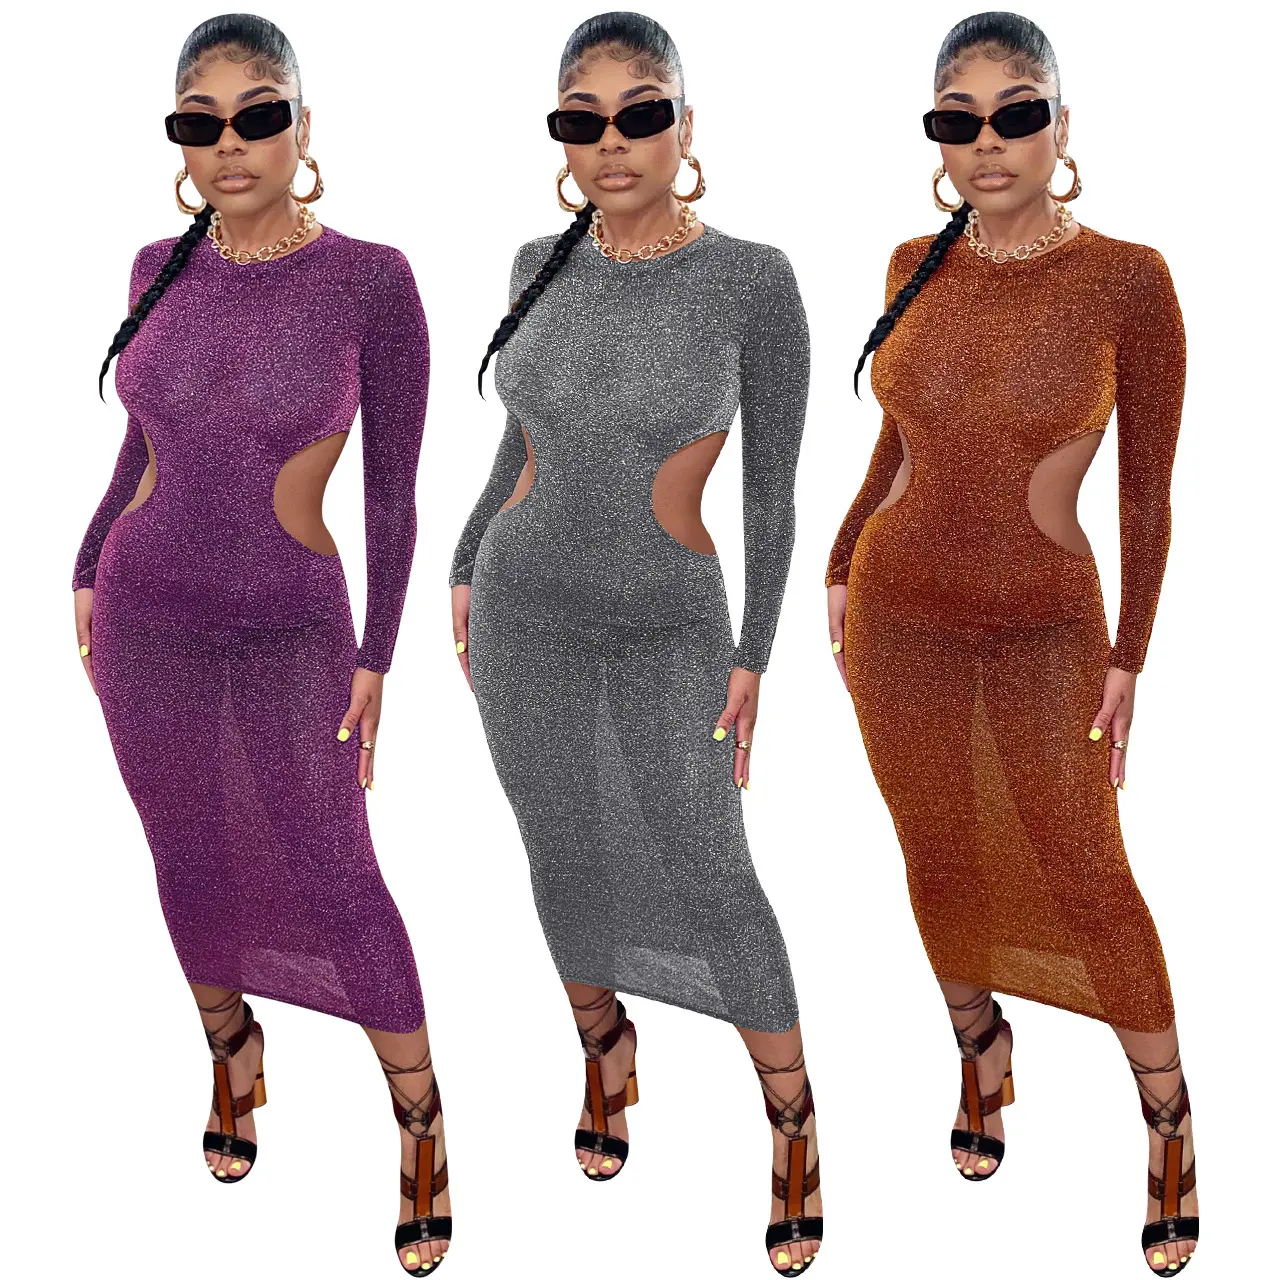 Fashionable And Sexy Waistless Dress Women Long Sleeve Solid Transparent Side Cut Out Floor Length Dress Club Party Wear